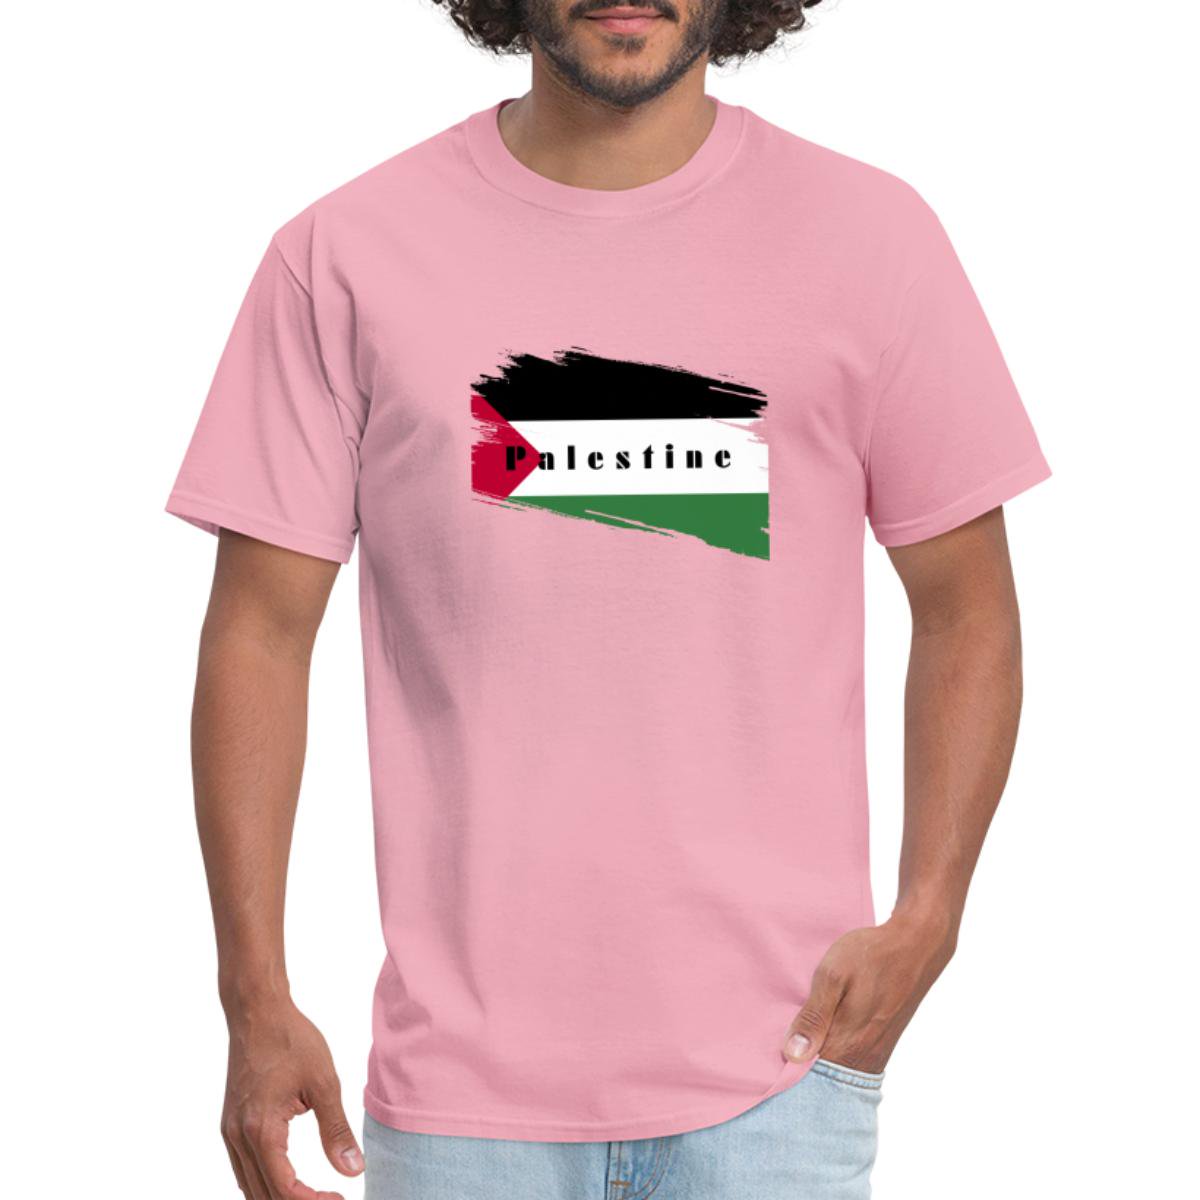 You know the Free Palestine movement has reached 'the masses' when Walmart is selling pink Palestine t-shirts. walmart.com/ip/Palestine-F…